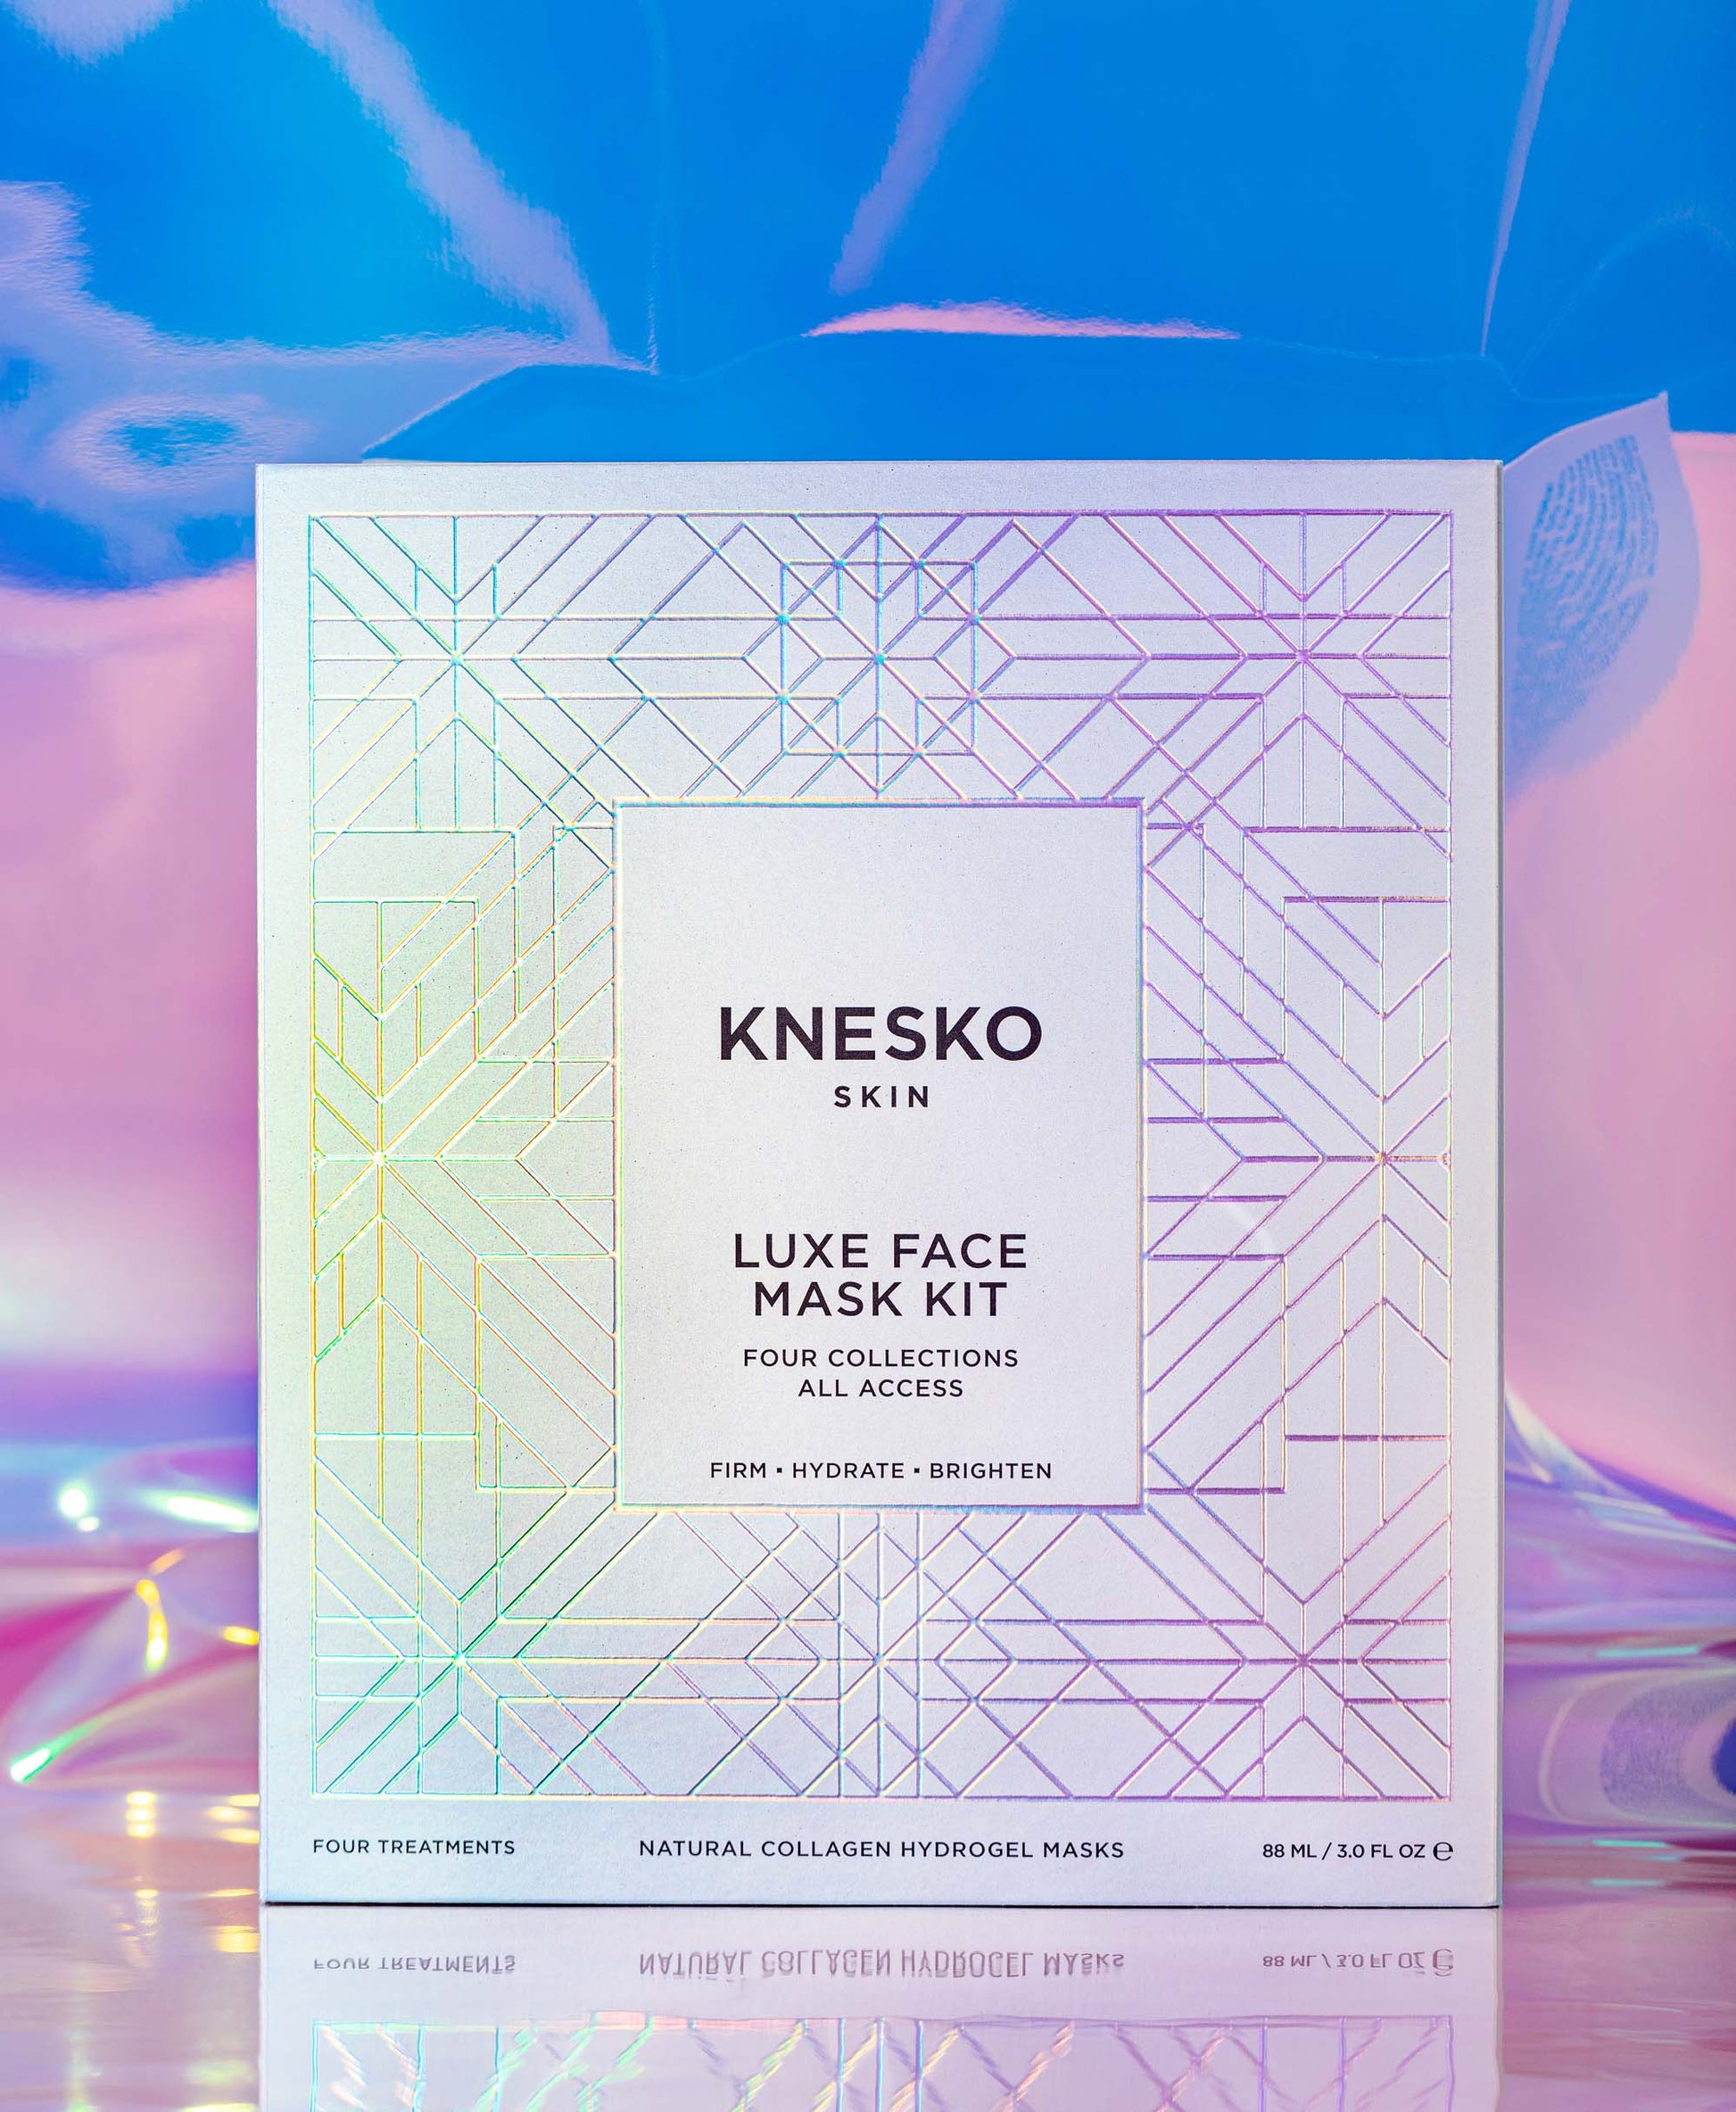 The Luxe Face Mask Kit box.